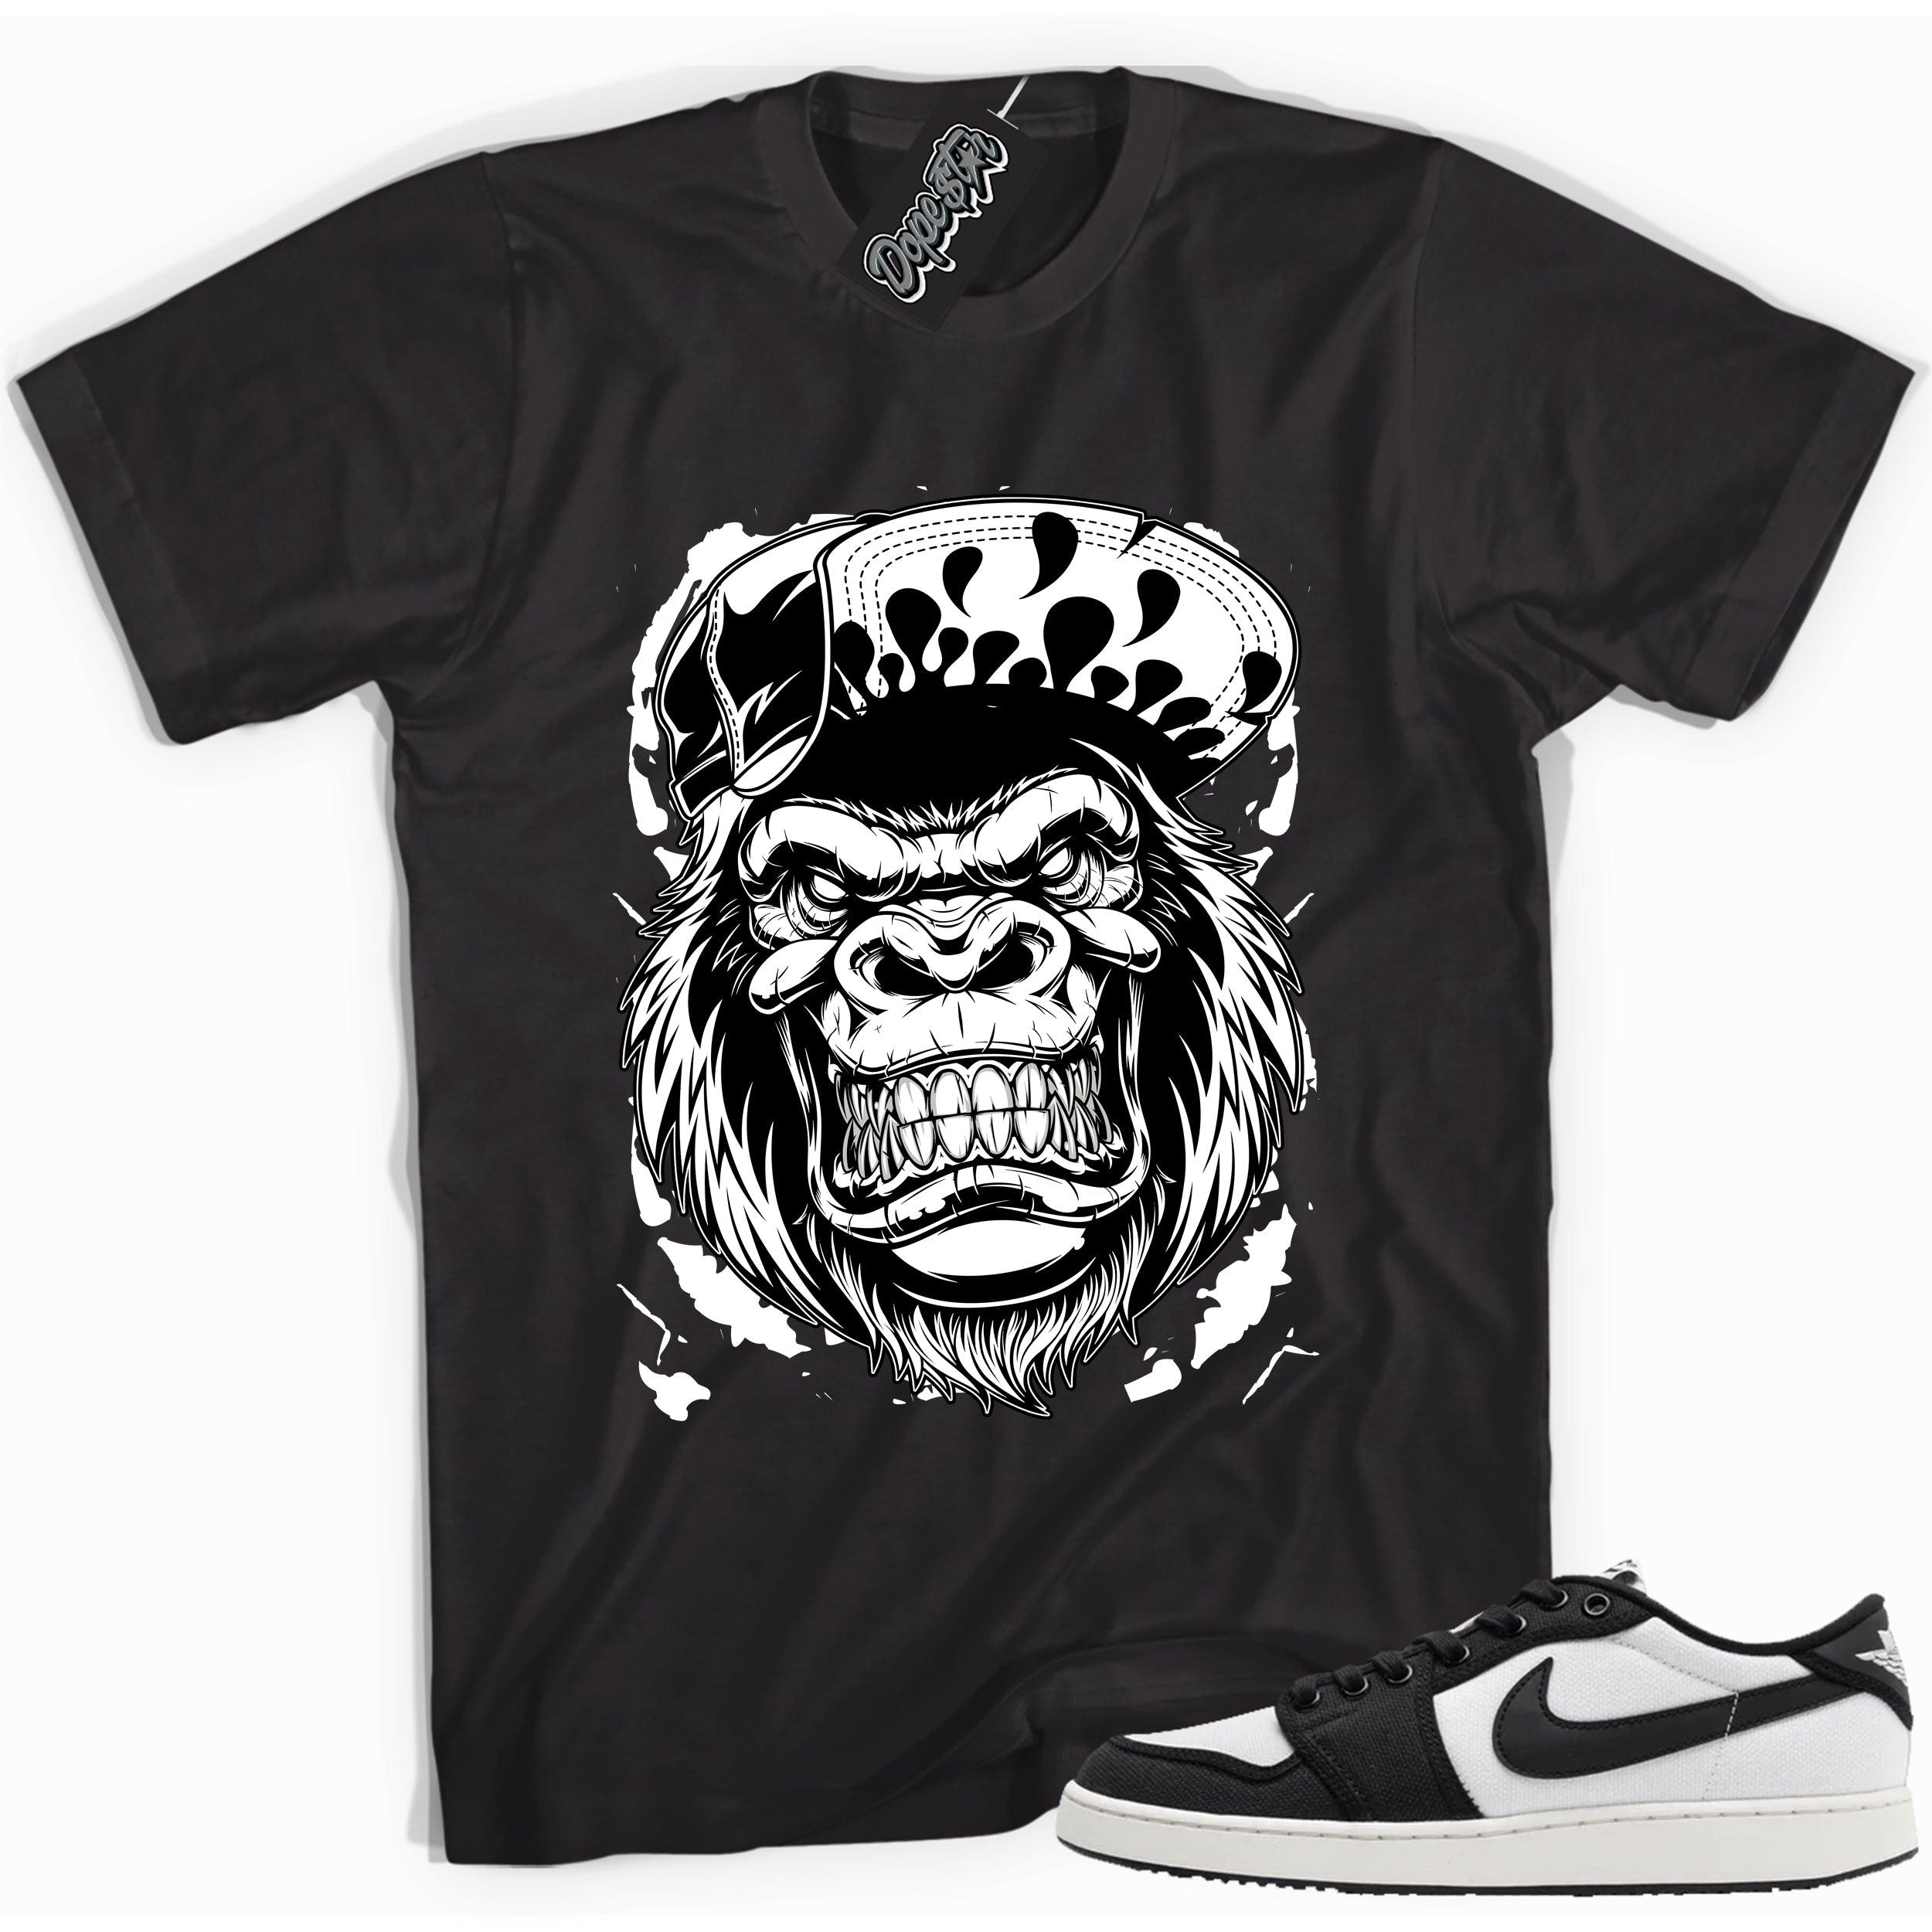 Cool black graphic tee with 'gorilla beast' print, that perfectly matches Air Jordan 1 Retro Ajko Low Black & White sneakers.